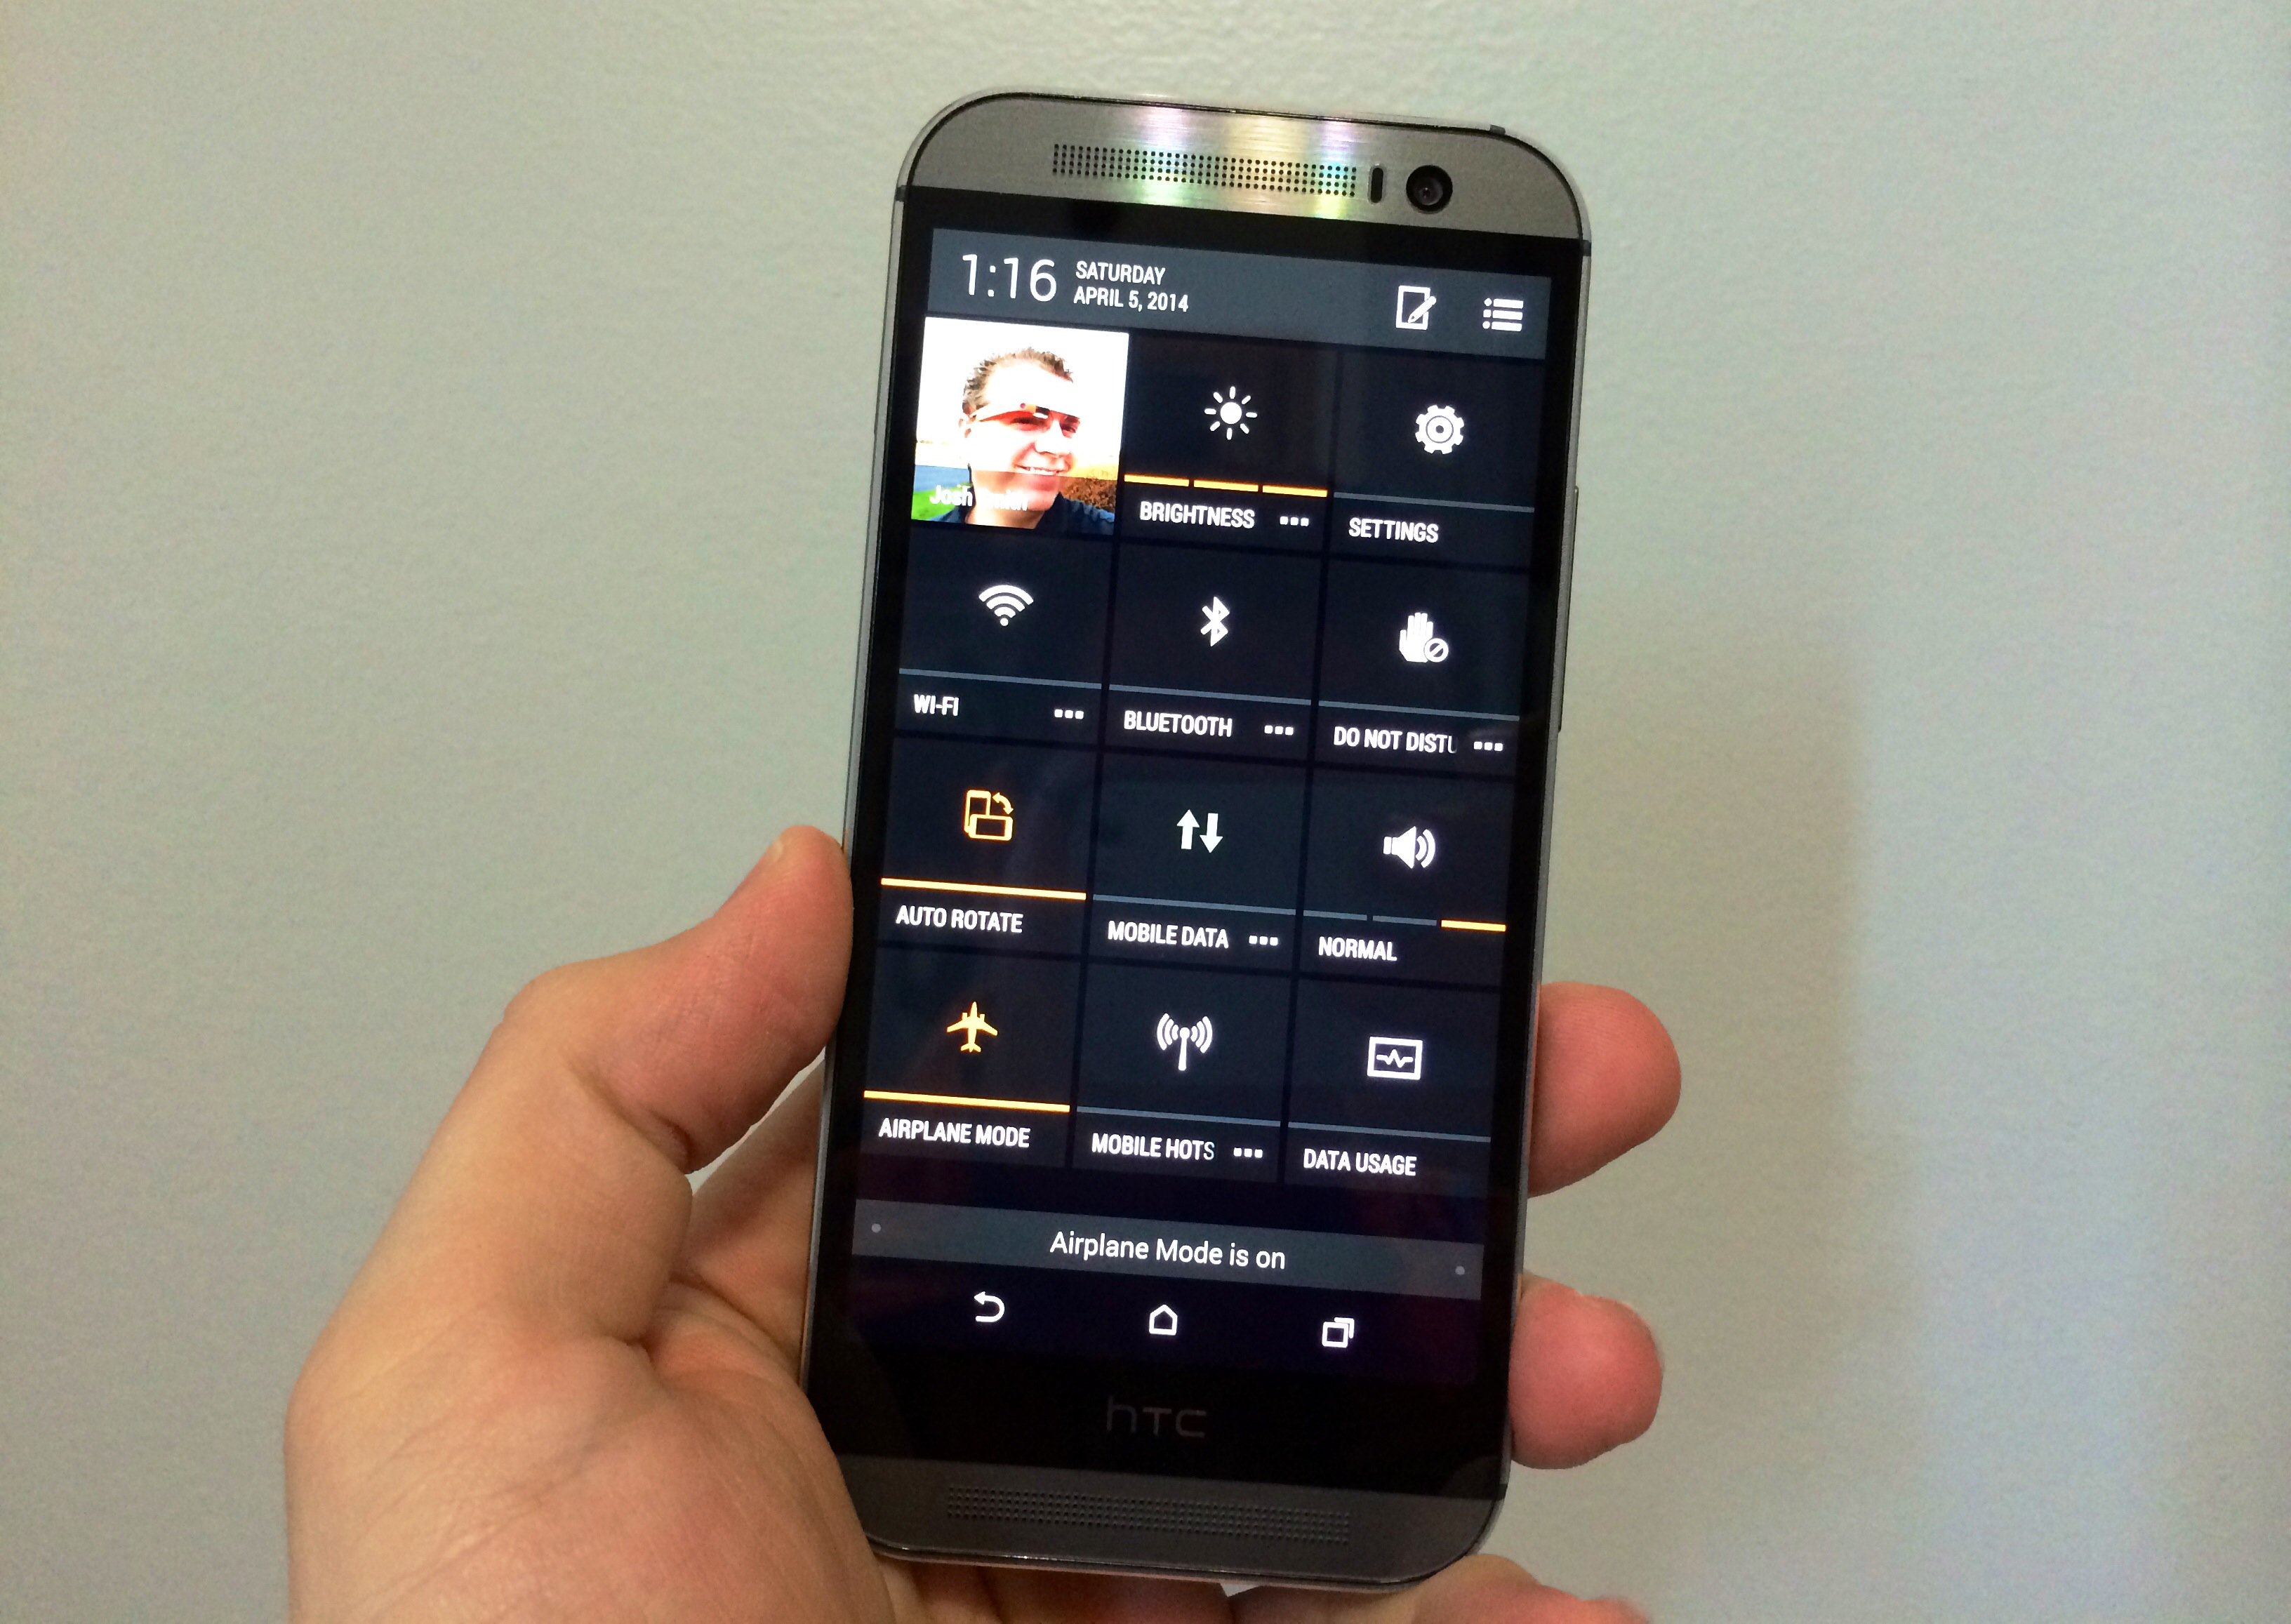 Here's how to access HTC One M8 settings quick, and to customize them.